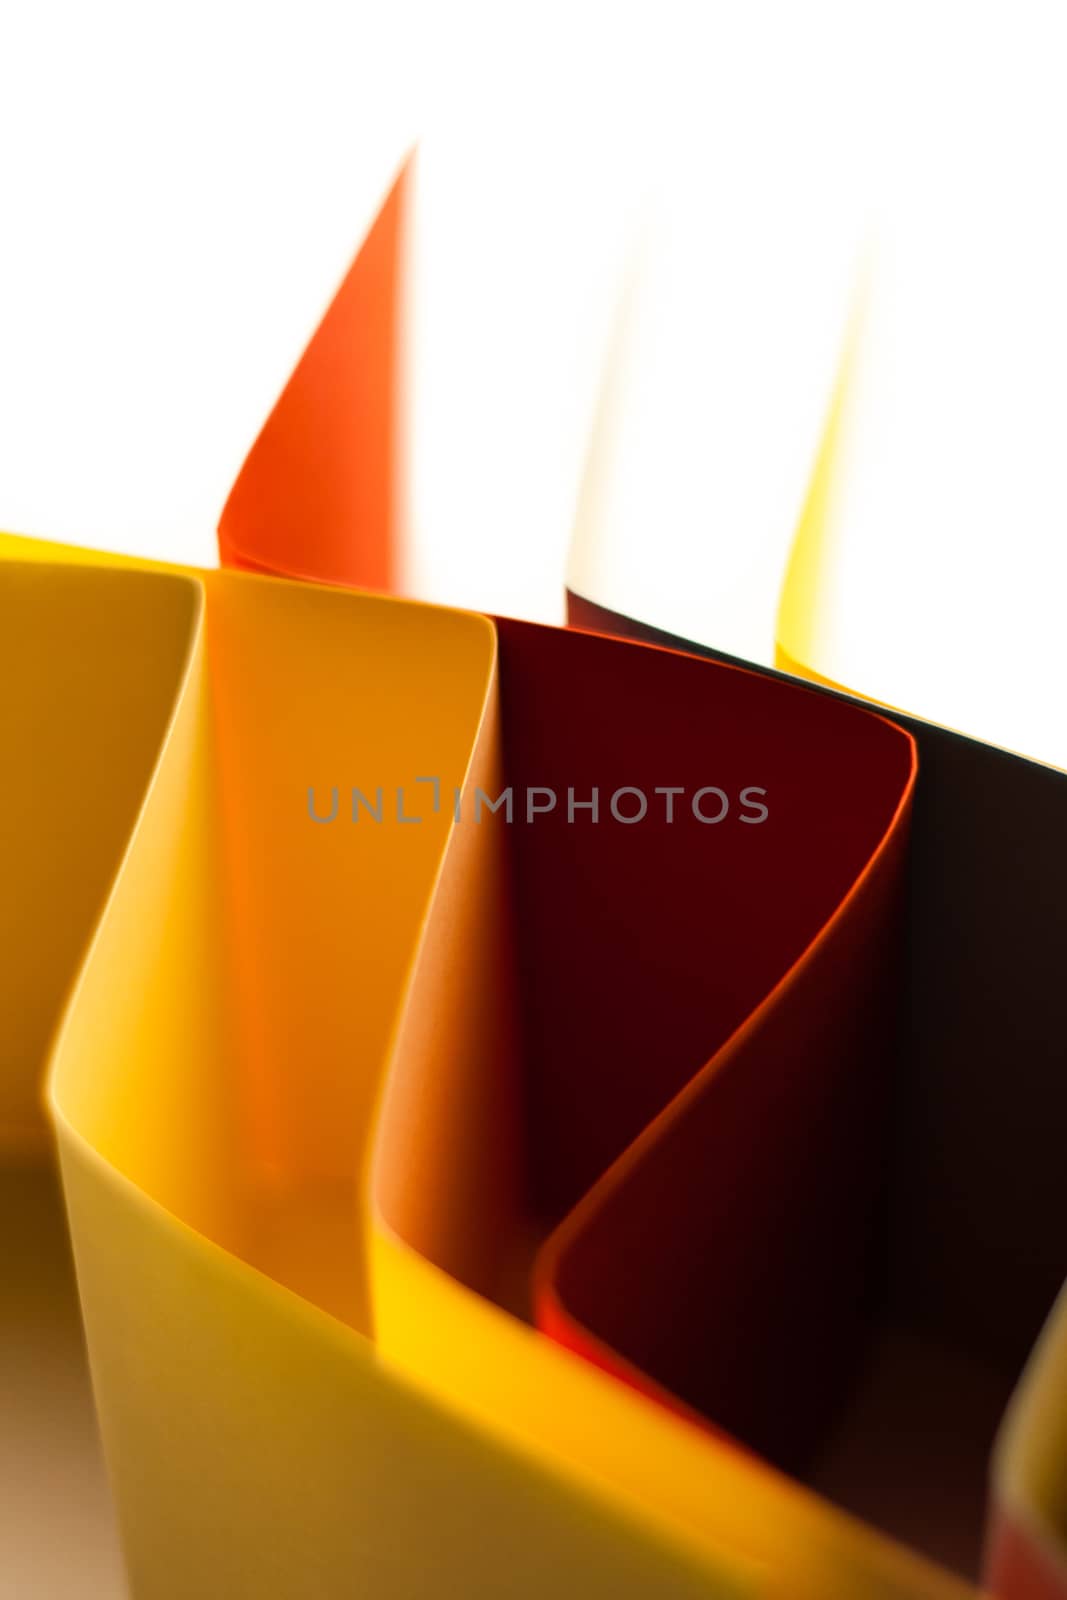 Colorful paper in unique shapes with shadow effect and selective focus.